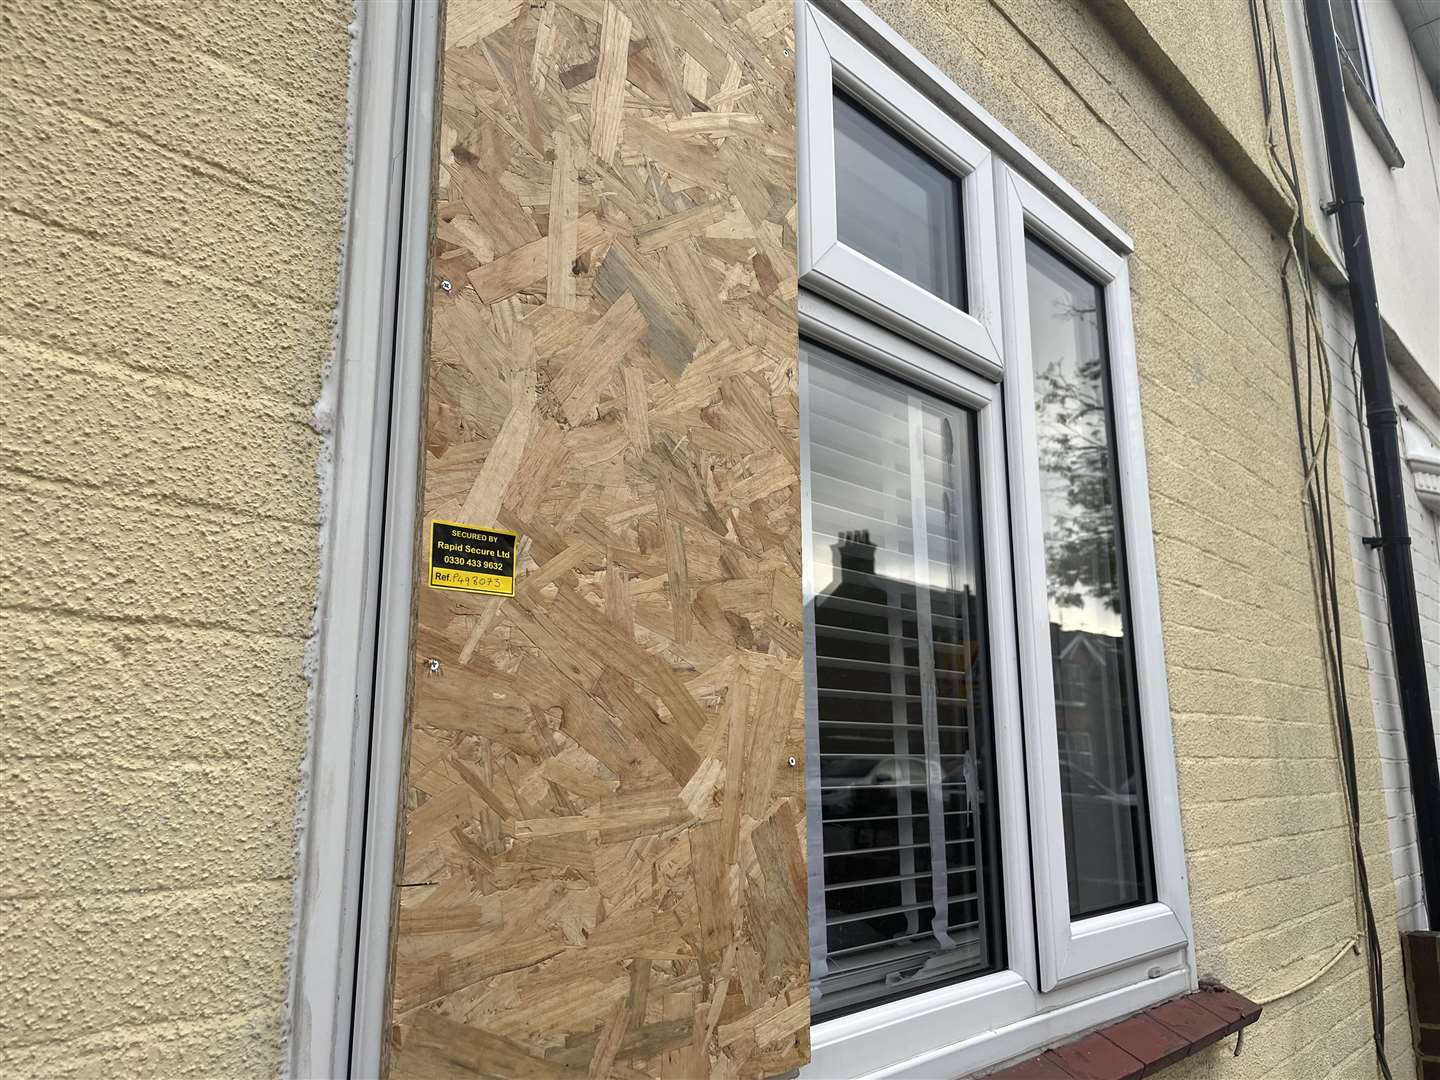 The window at the front of the house which was smashed has now been boarded up